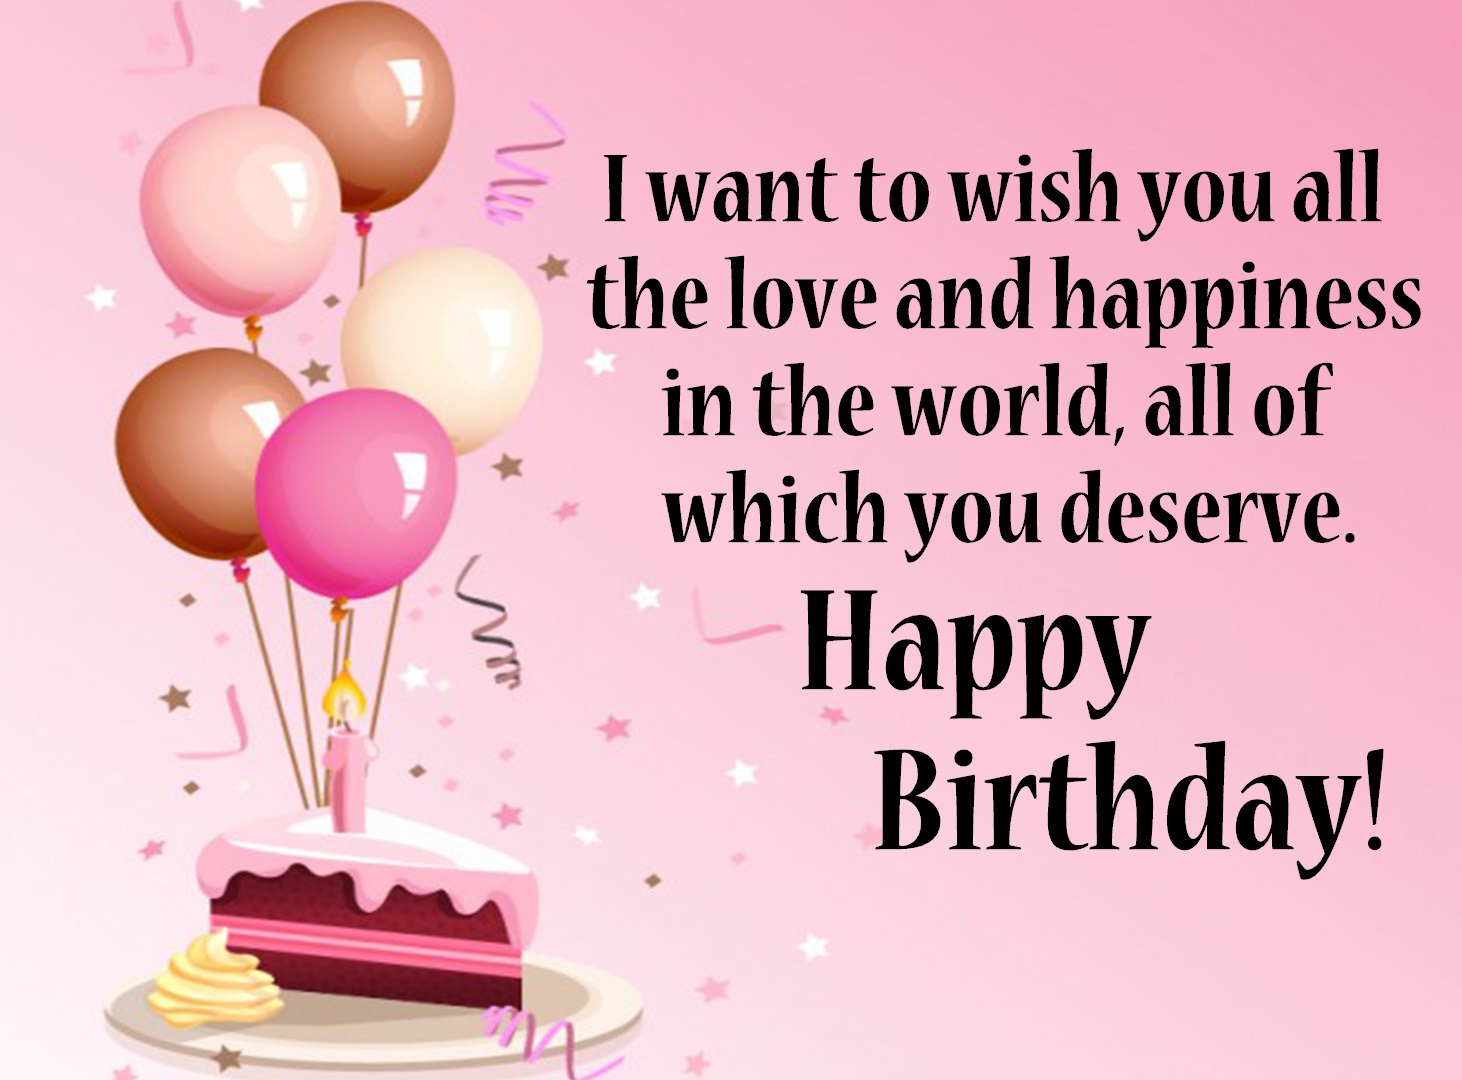 Birthday Wishes Cards 2018 Images | Happy Birthday Greetings Messages